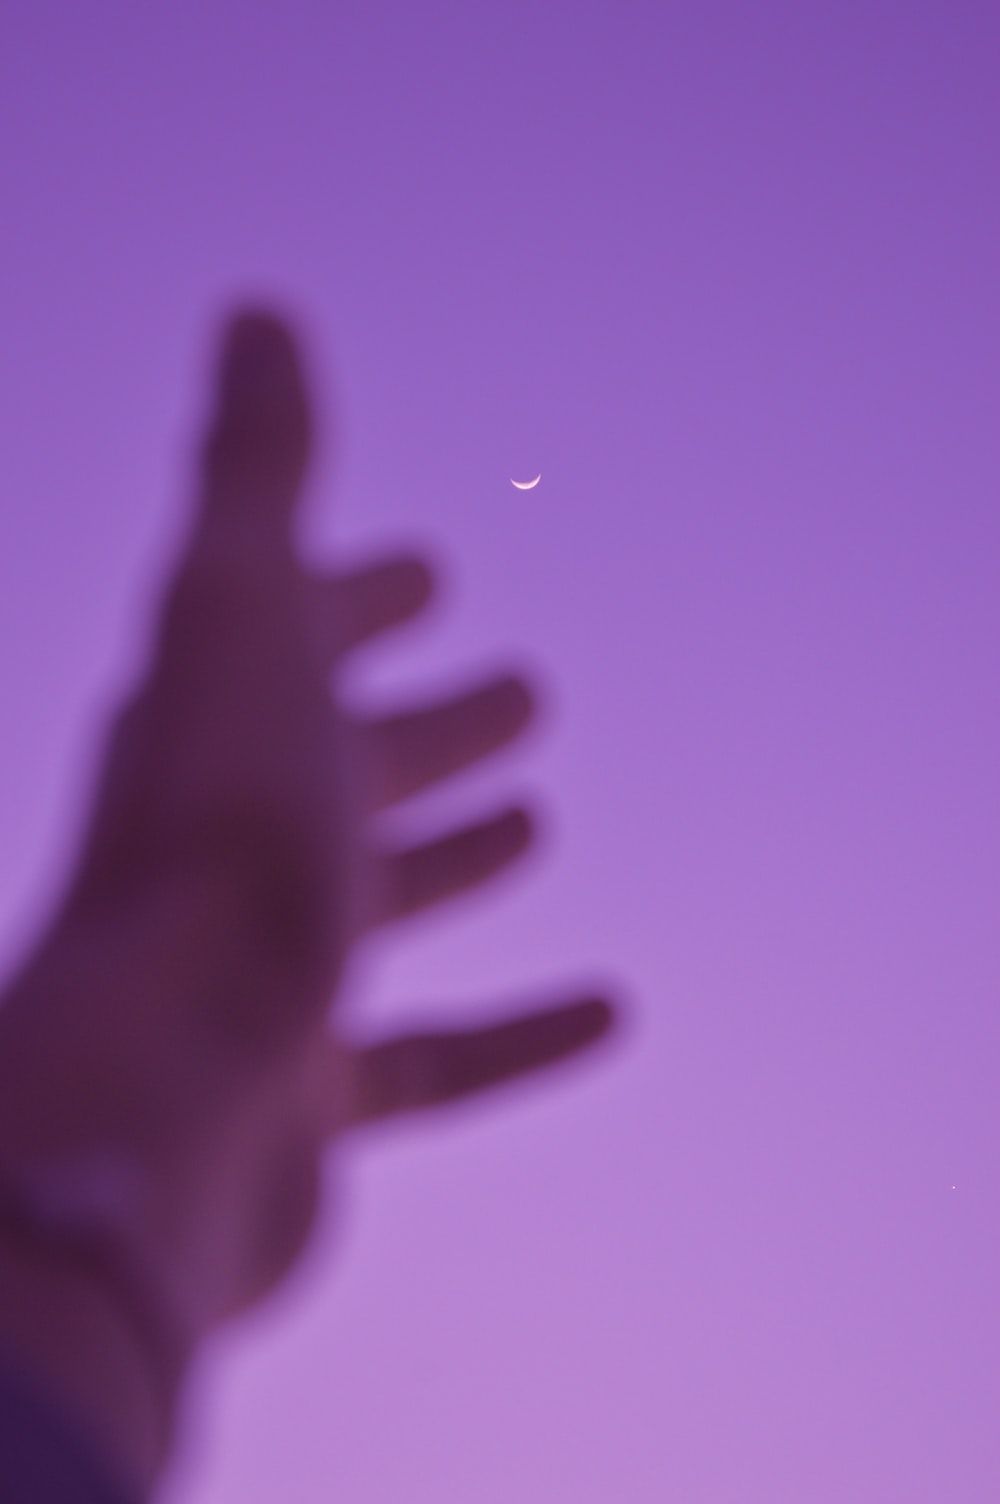 A blurry photo of a person's hand with a half moon in the photo